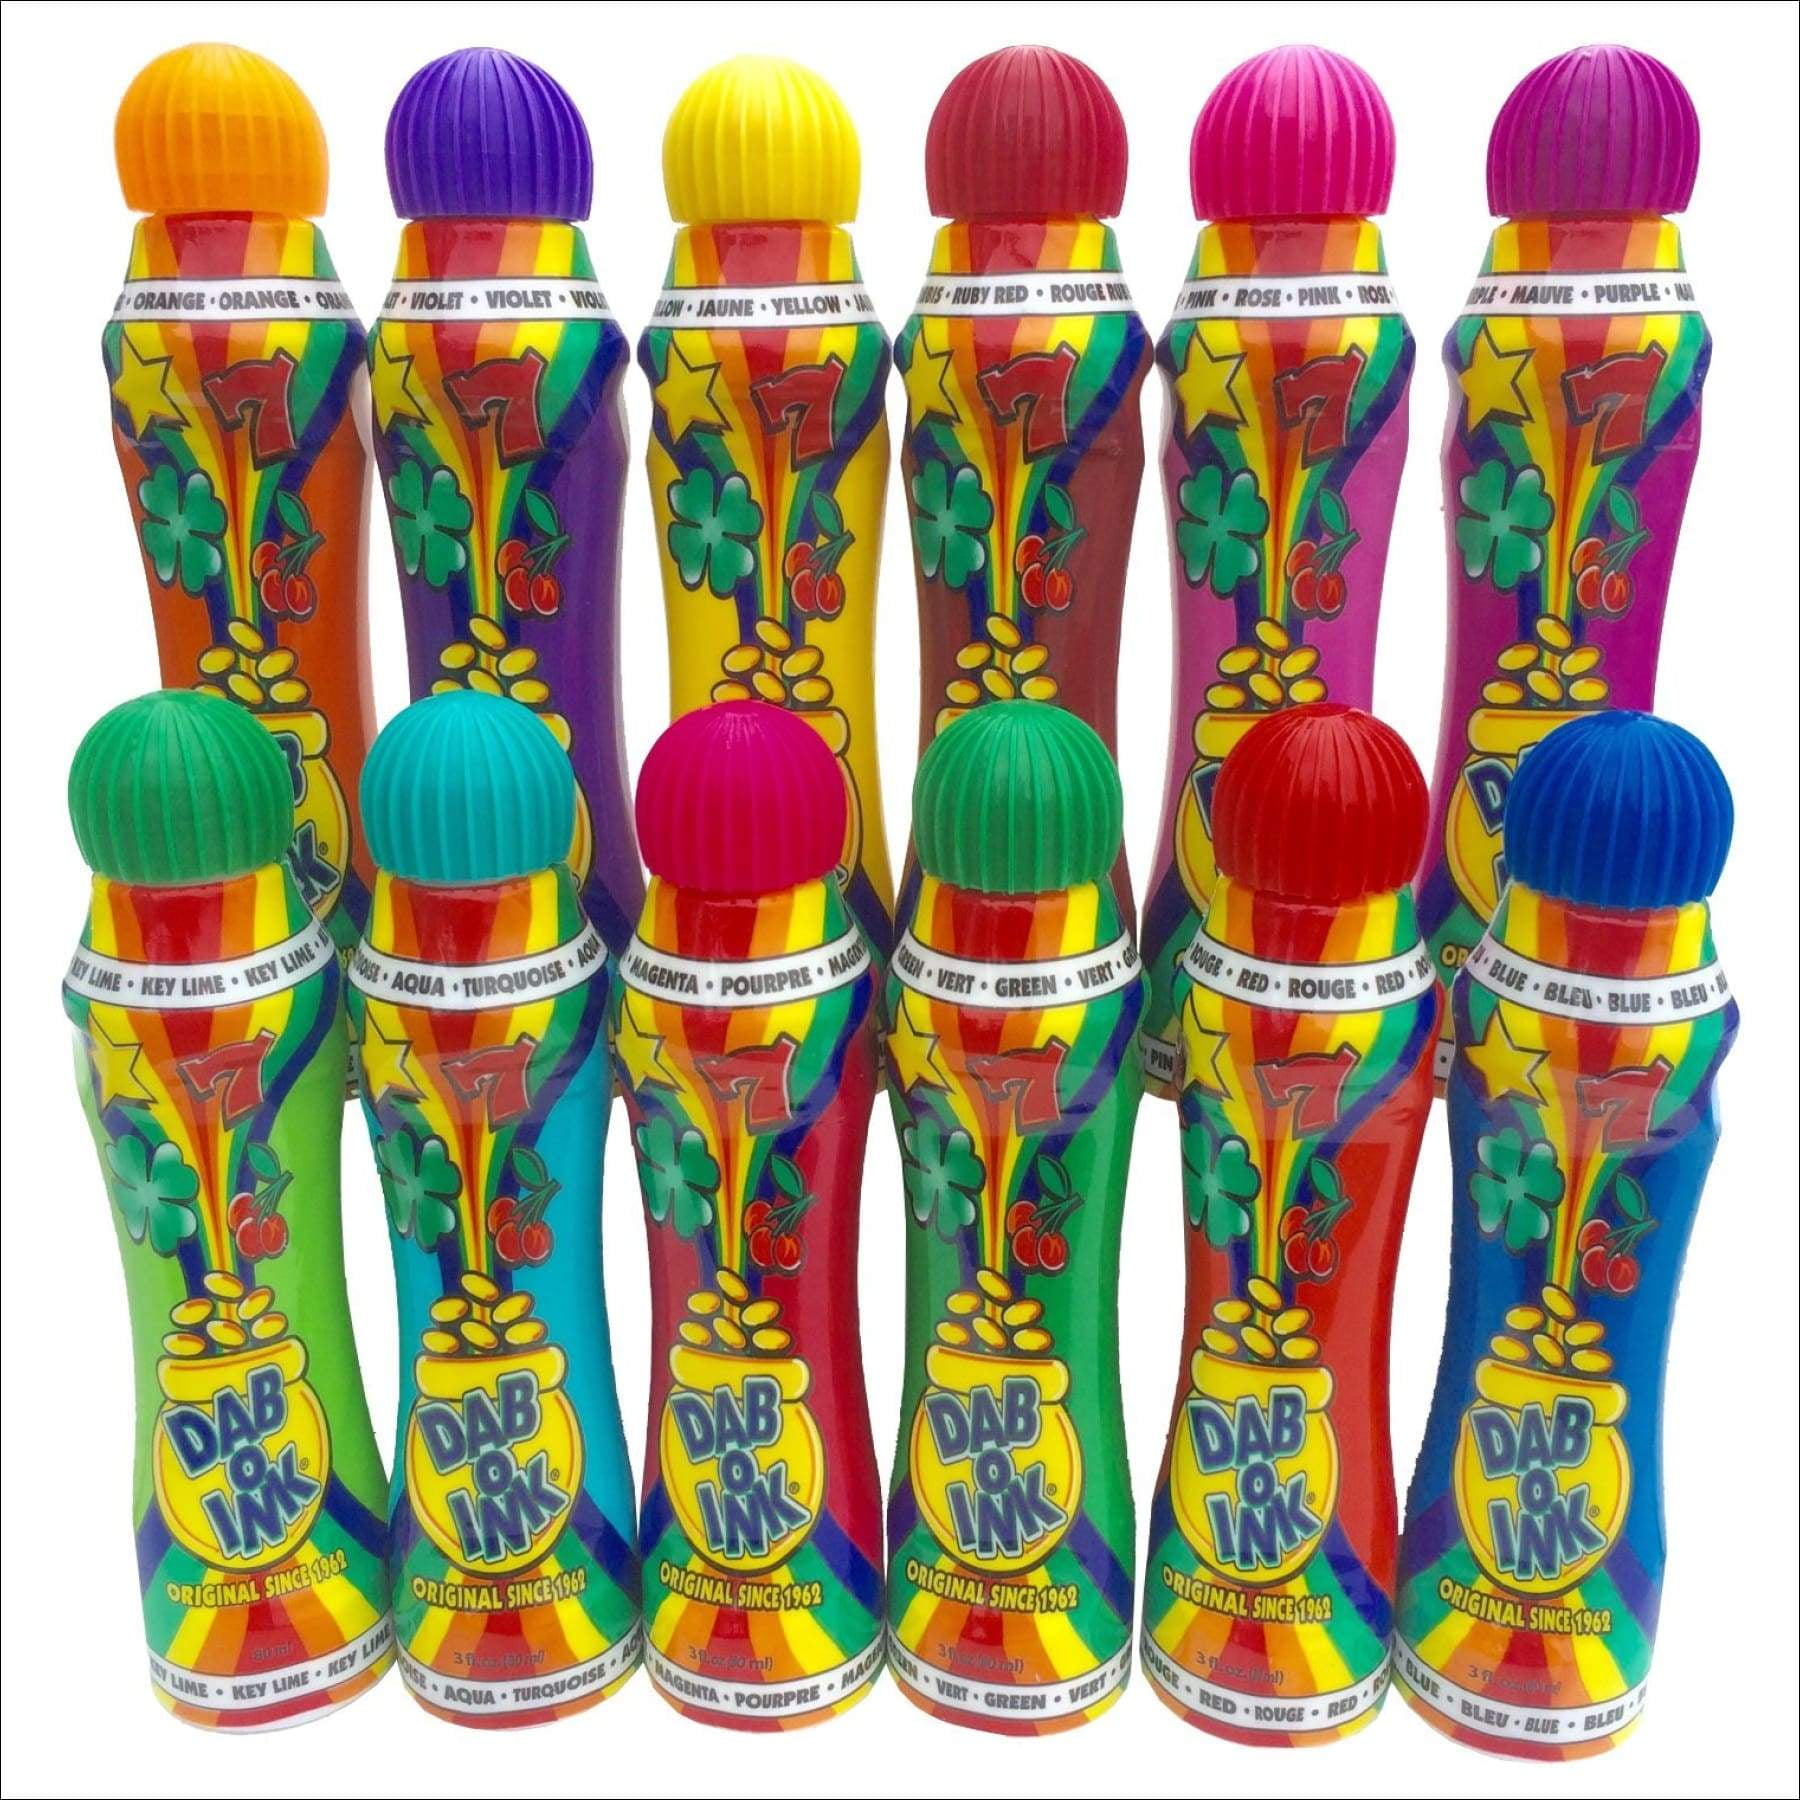 50 Bingo Dabbers 20ml of in in each, Container Of Mixed Colours, Bingo  Accessory : : Toys & Games